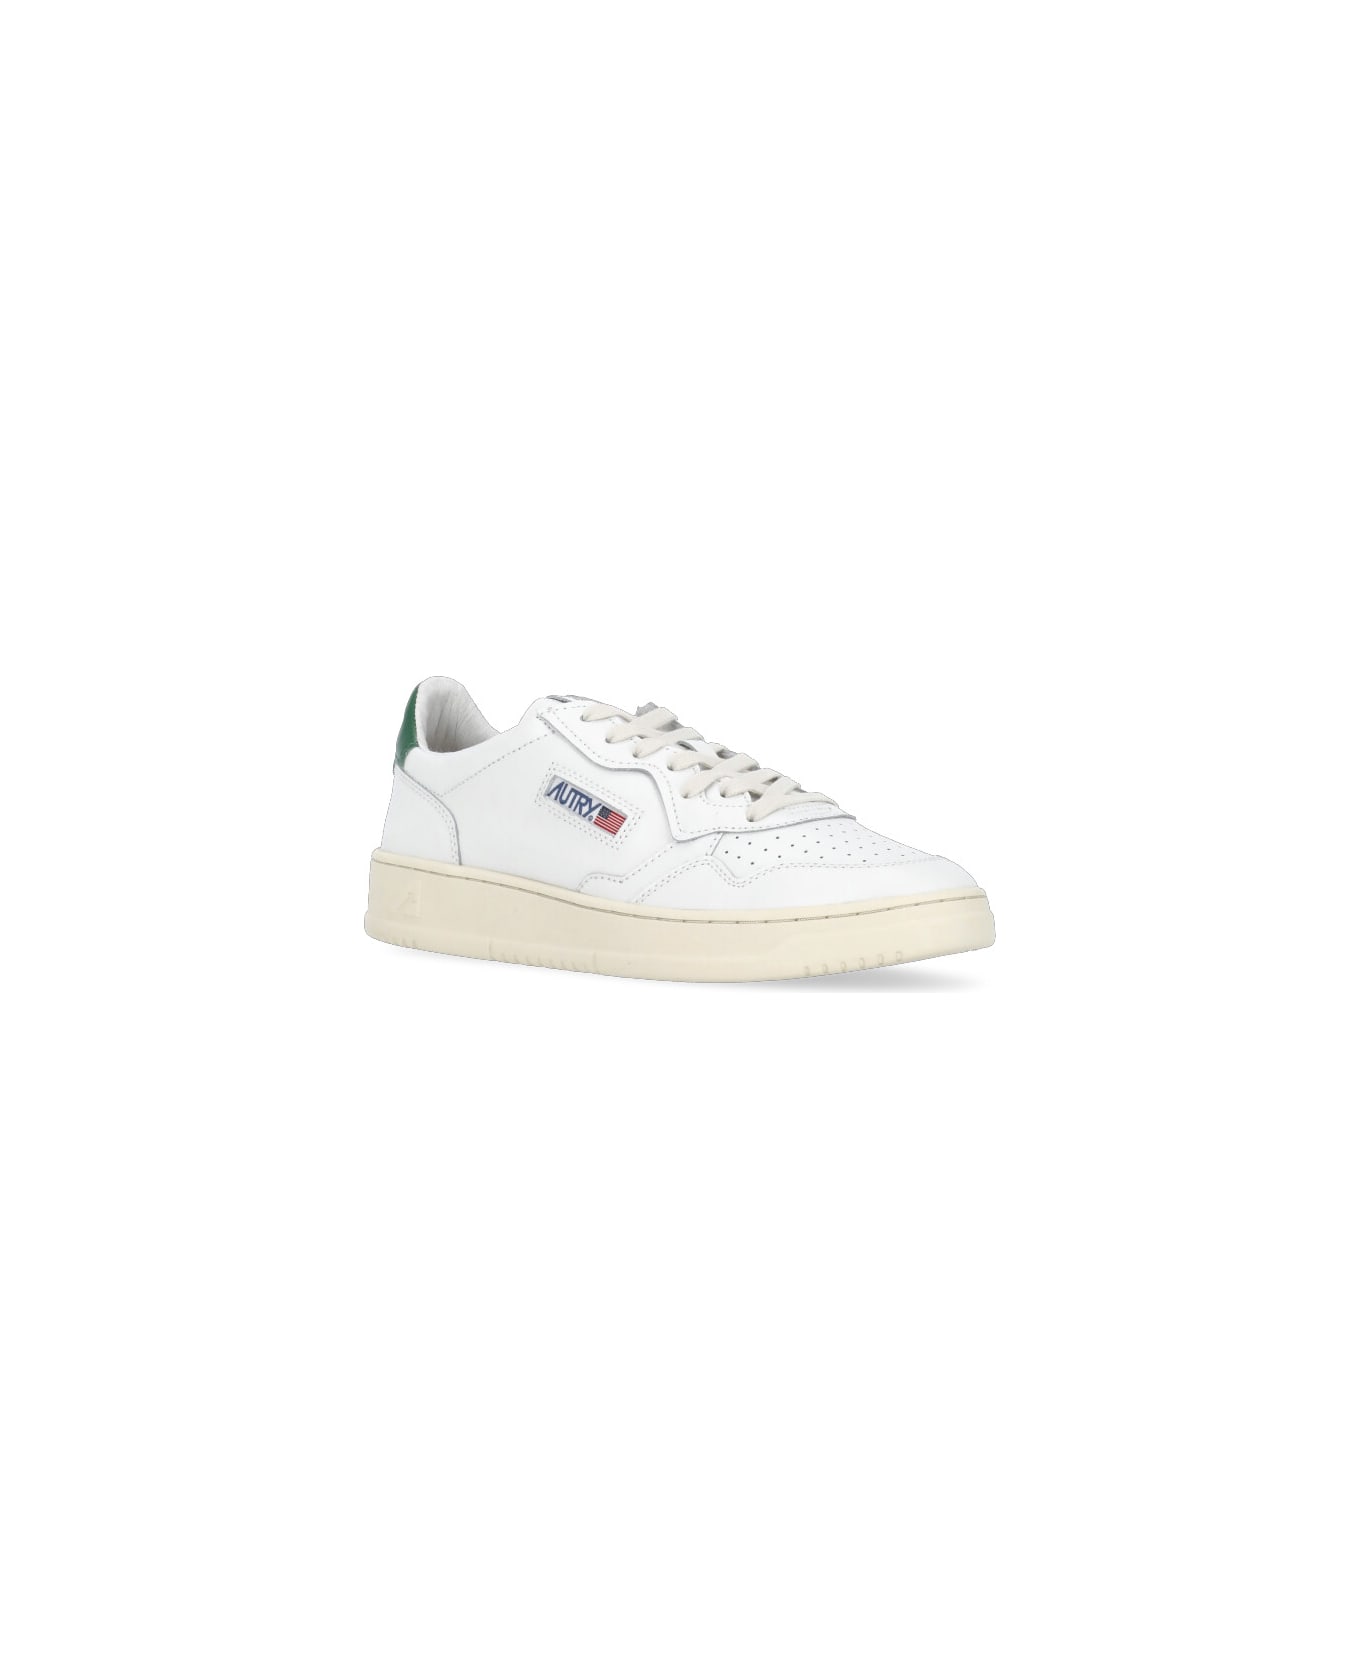 Autry Aulm Ll20 Sneakers - White